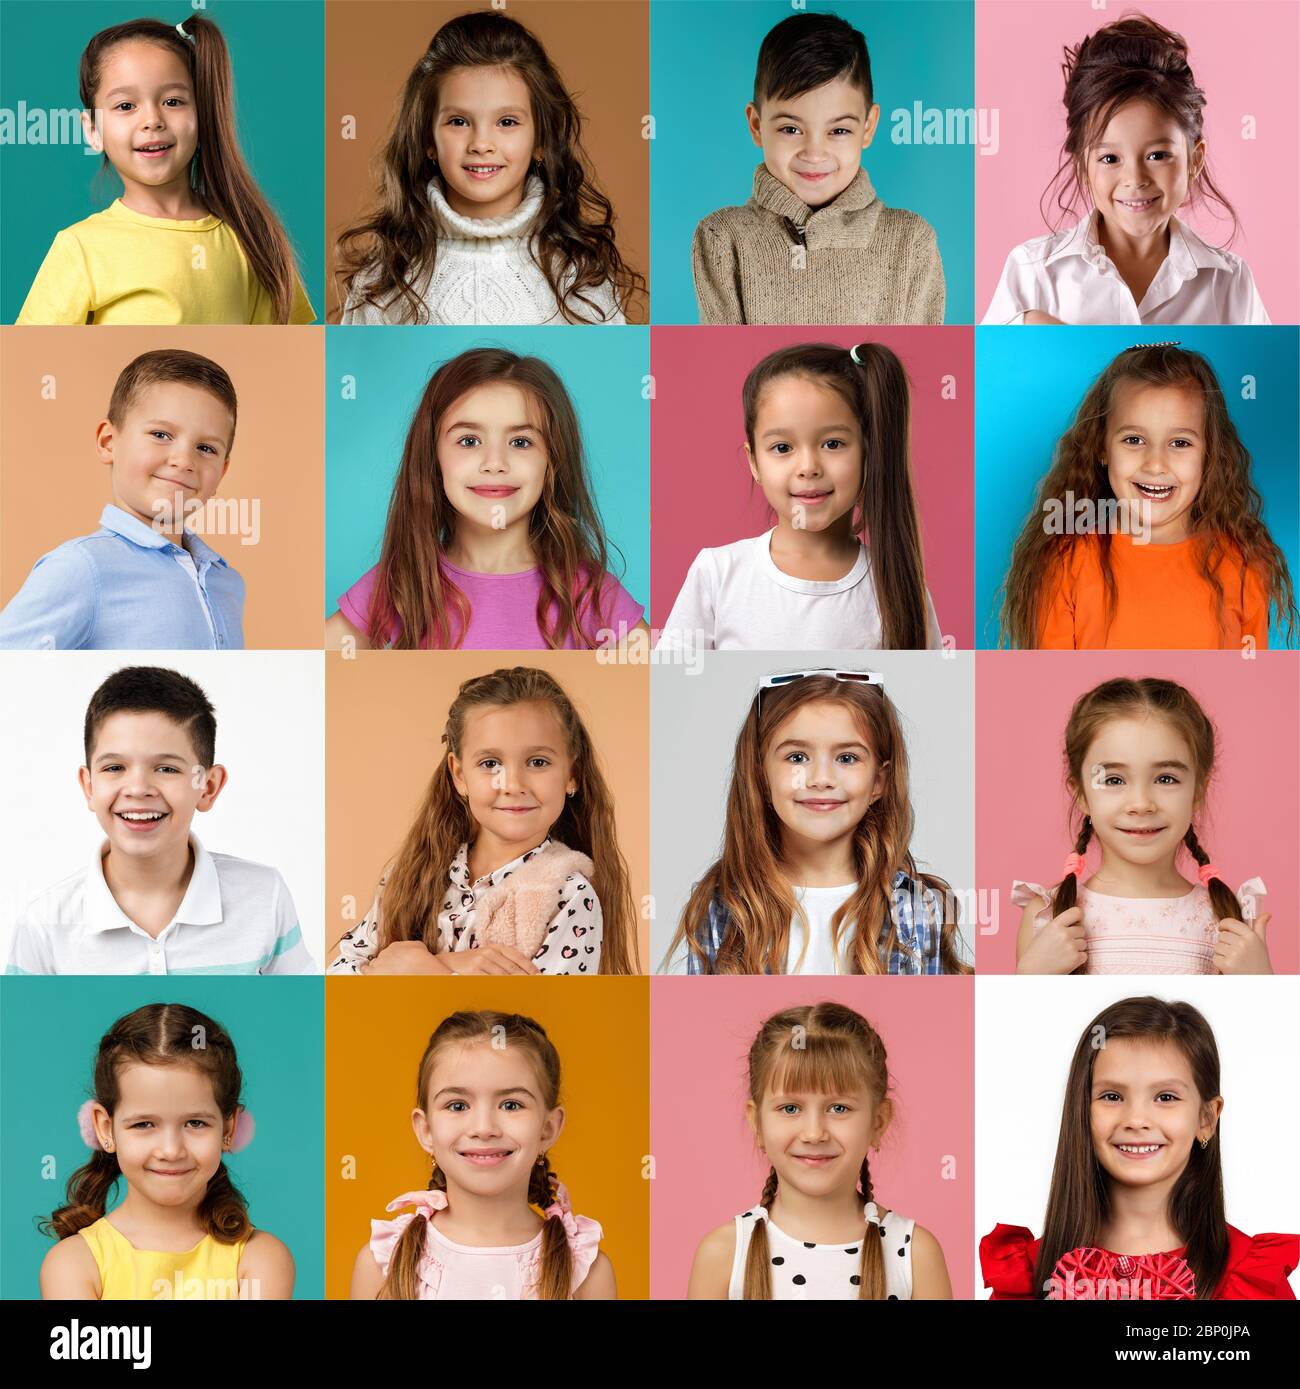 facial expressions and emotions for children